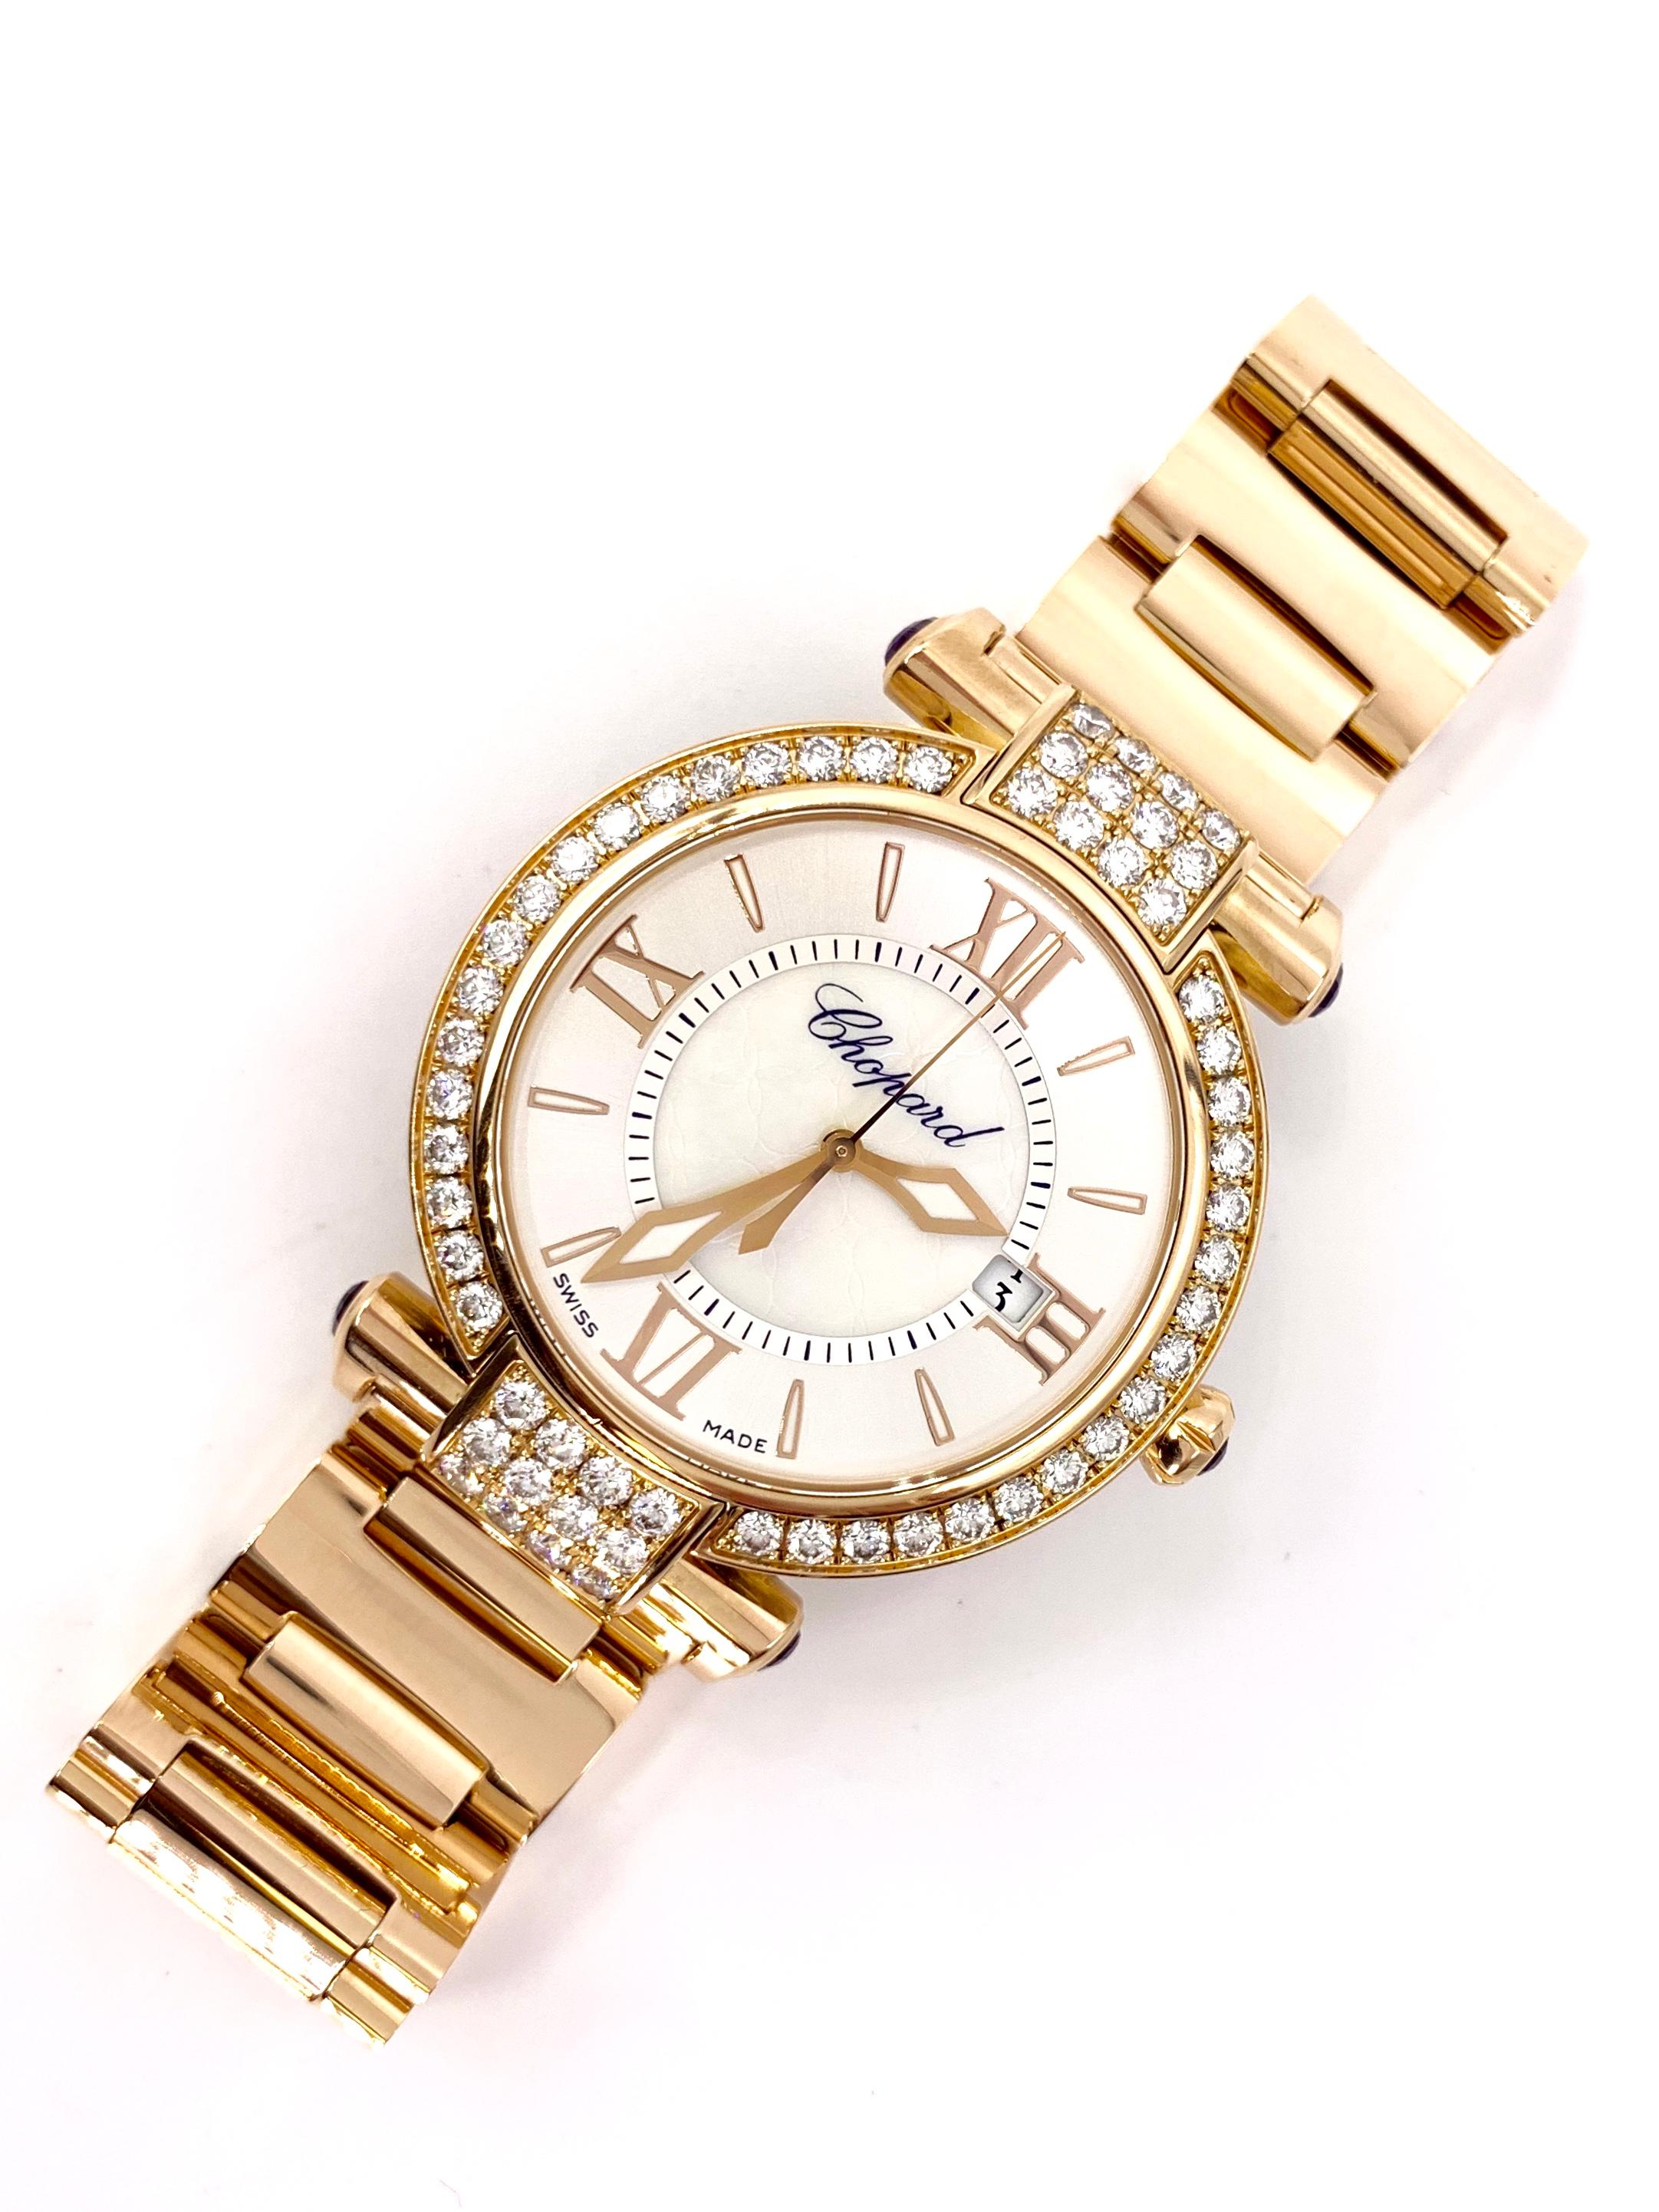 Gorgeous solid 18 karat rose gold Chopard Imperiale quartz watch featuring round brilliant diamonds and amethyst gemstones. Watch will arrive with original paperwork and original boxes. Current retail: $43,400
Watch Specifications:
Model: 750/000